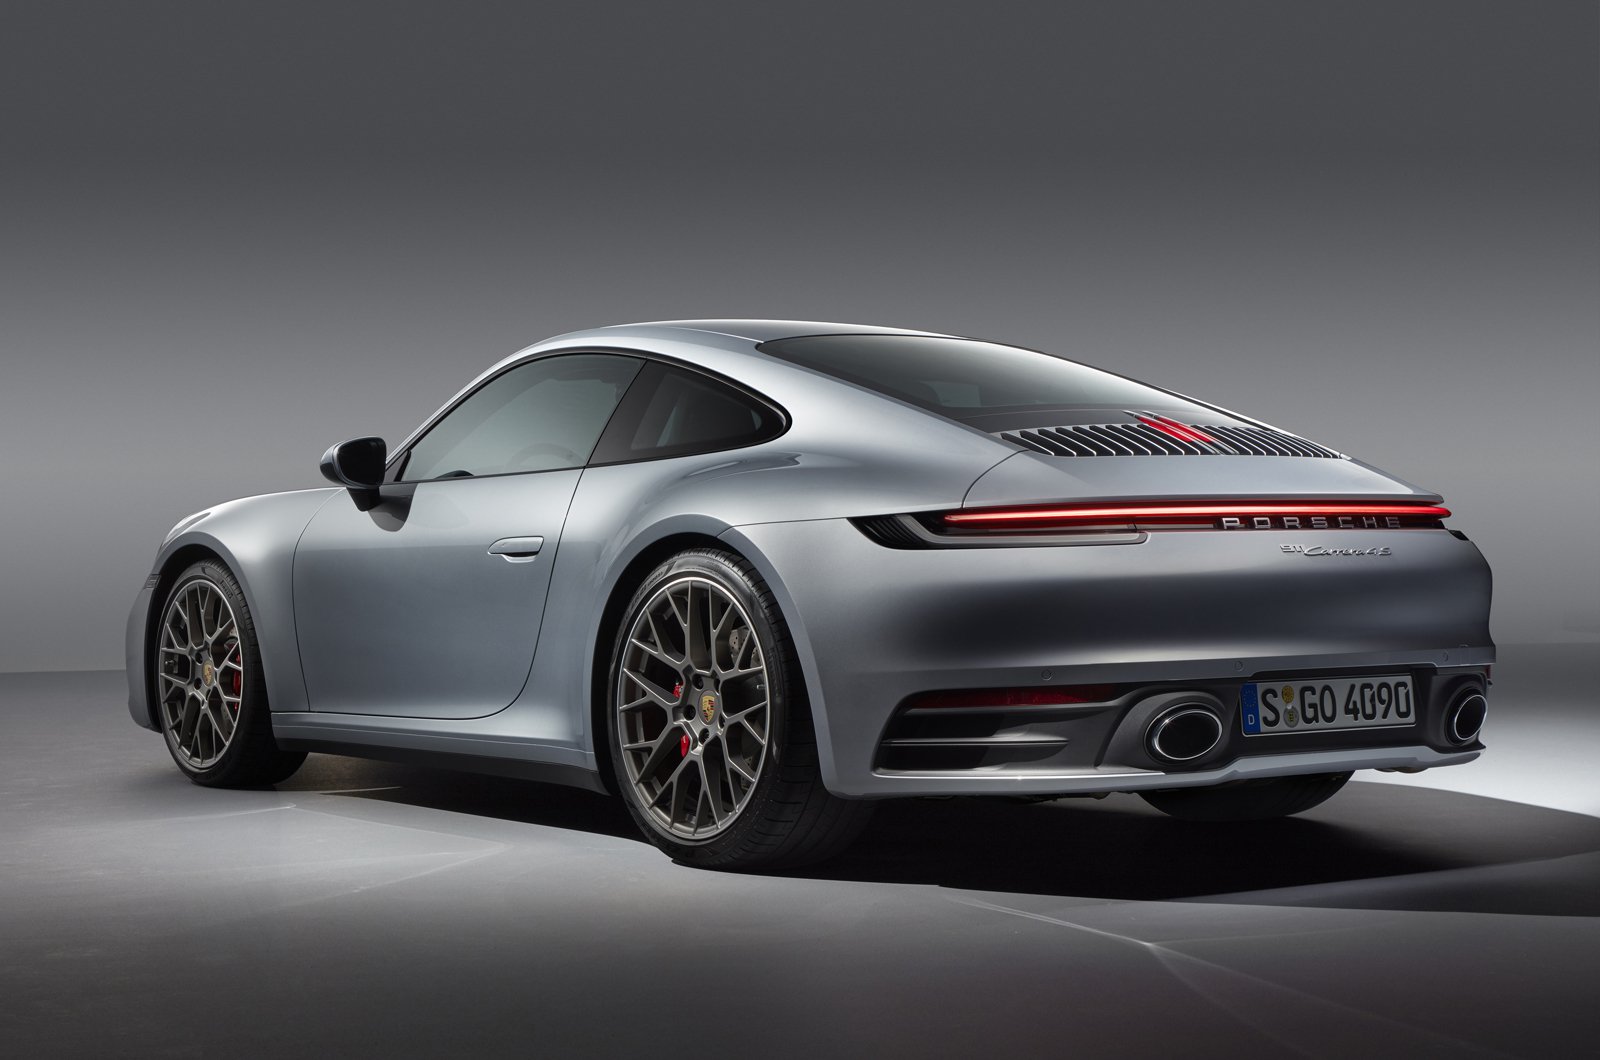 <p>There’s an Irish Green 991-generation Porsche 911 that marks a very important point in 911 history: it’s the one millionth produced of this famous sports car. Longevity helped the 911 reach this mark in early 2017, with another <strong>30,000</strong> or so being added to that number <strong>each year</strong>, but its enduring appeal is as a machine with supercar pace that you can drive all day, every day.</p>